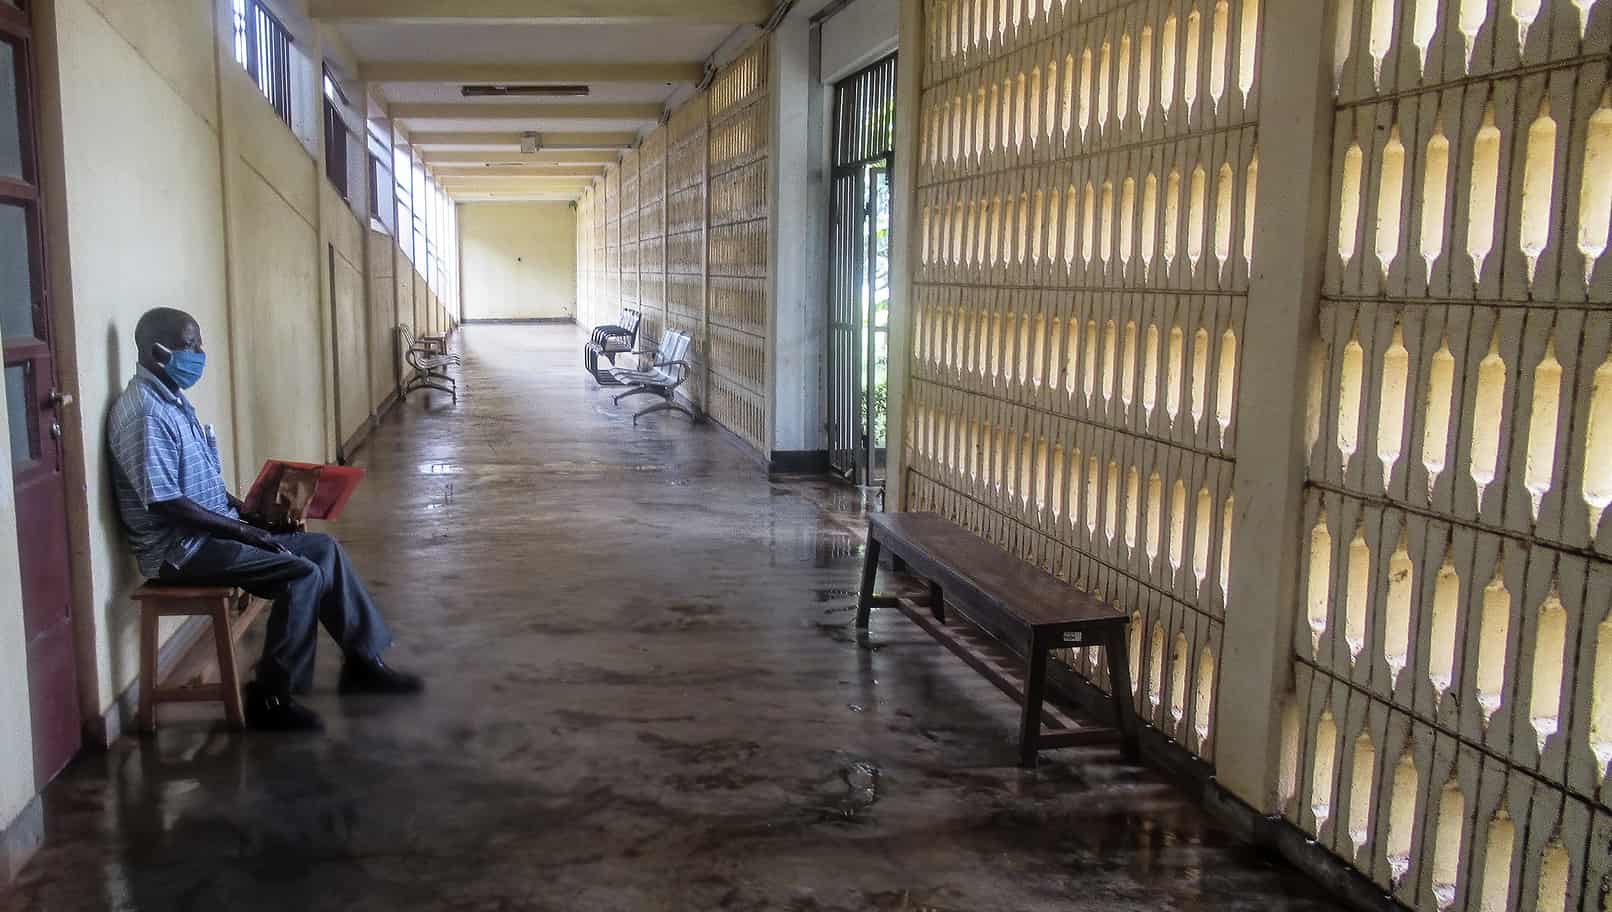 A man sits by himself in an empty hospital corridor.